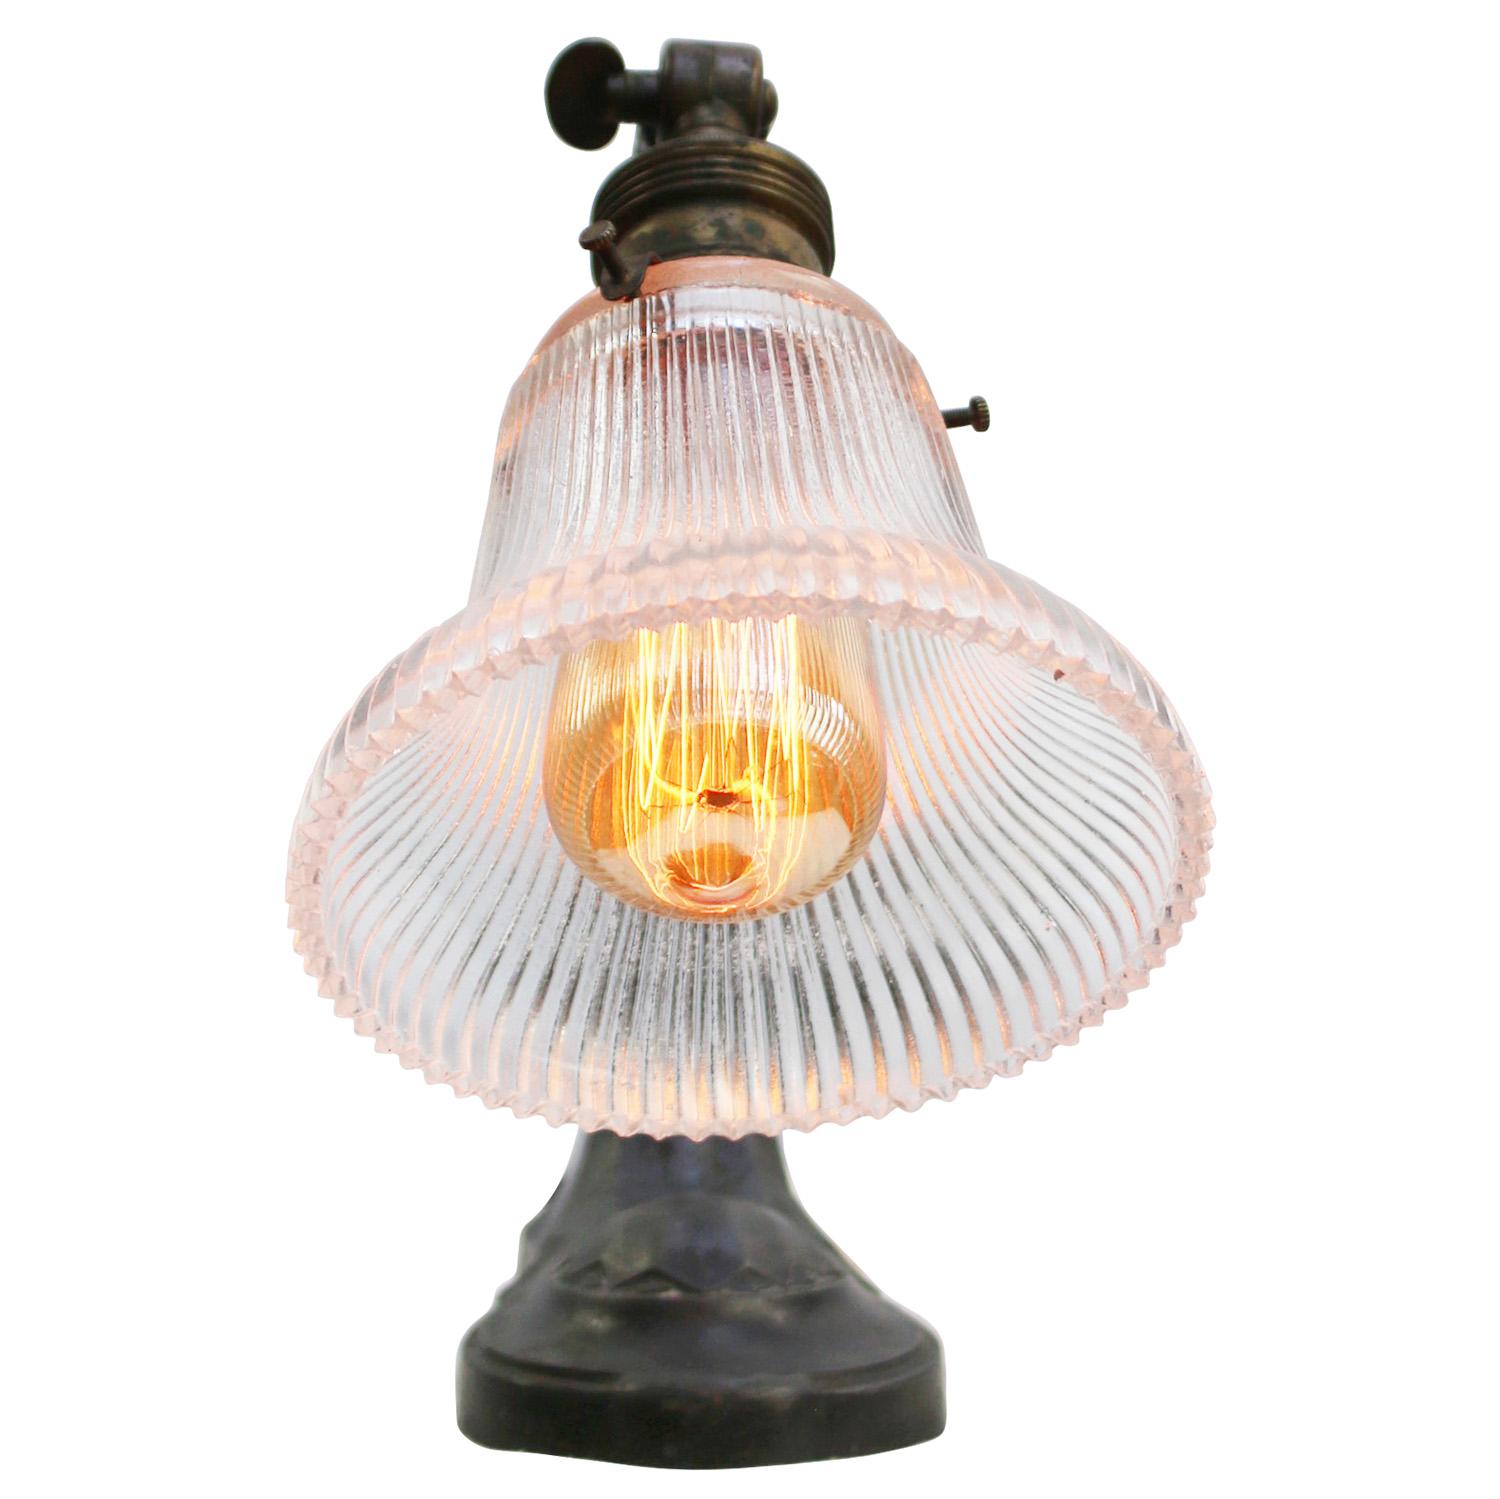 French 1920s desk light.
Cast Iron Base and arm with Holophane glass shade.
Black cotton wire and plug.

Also, available with US/UK plug

Priced per individual item. All lamps have been made suitable by international standards for incandescent light